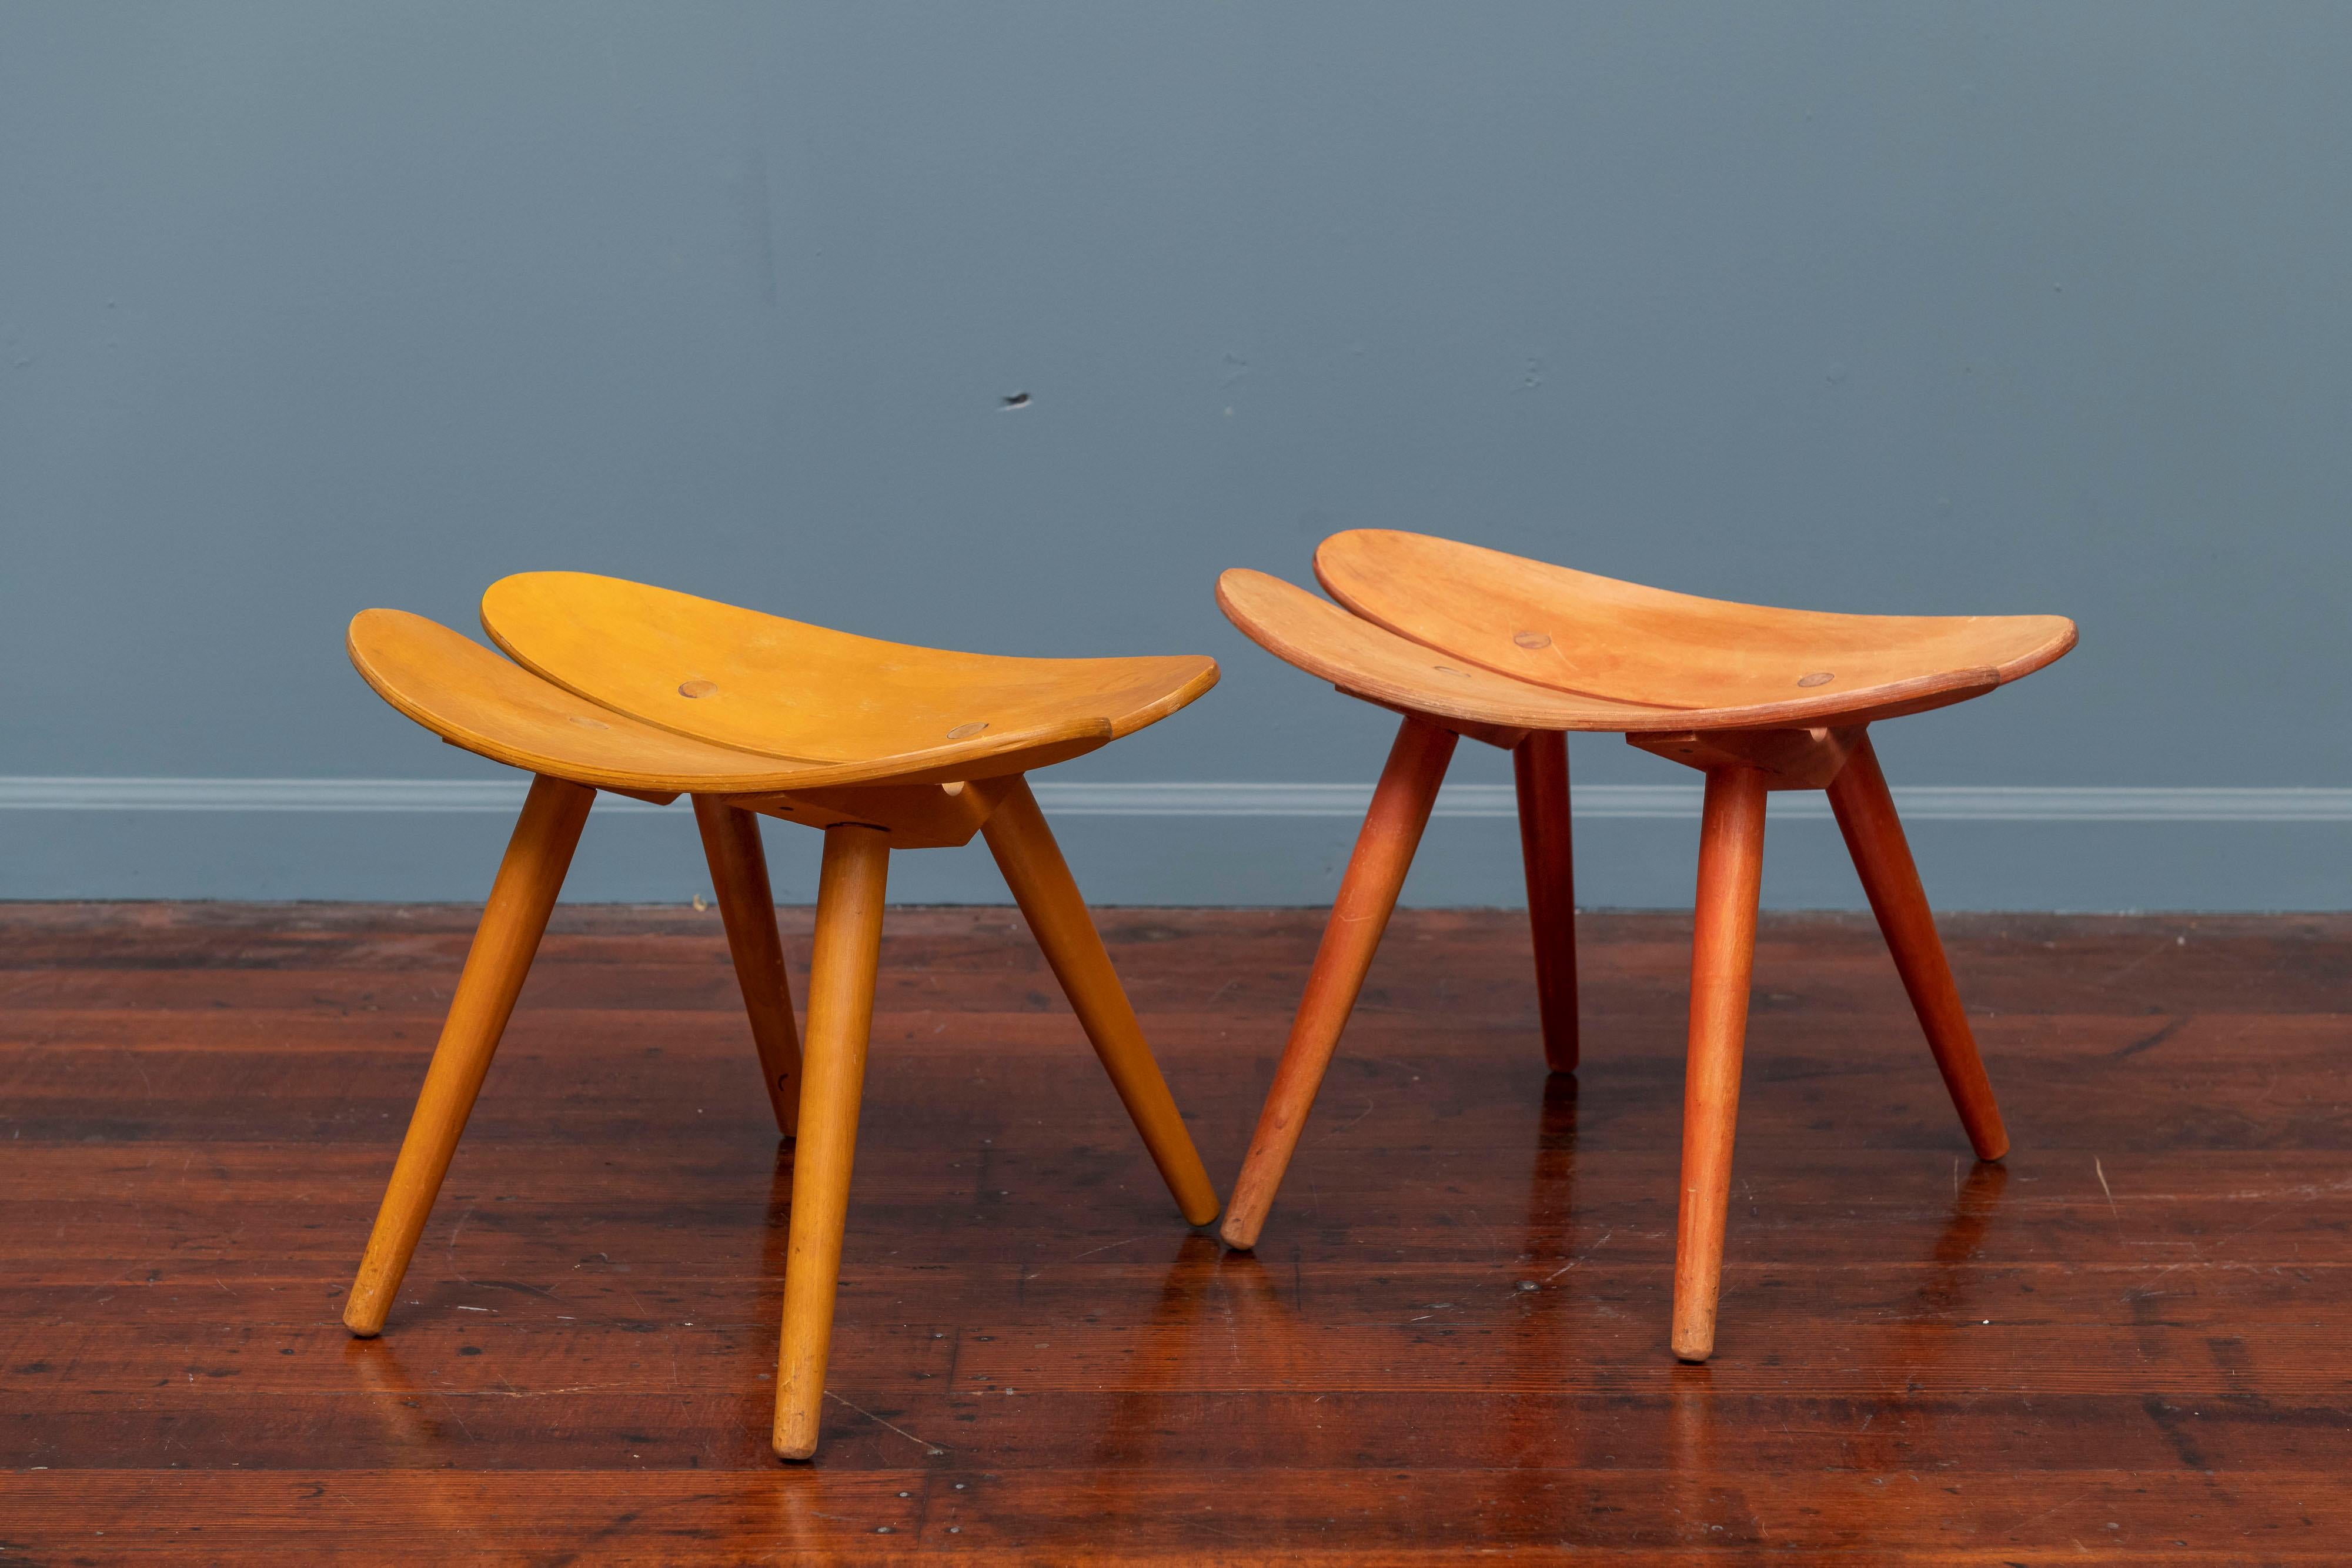 Scandinavian stools in anodized yellow and red with slight color fade consistent with age and use.